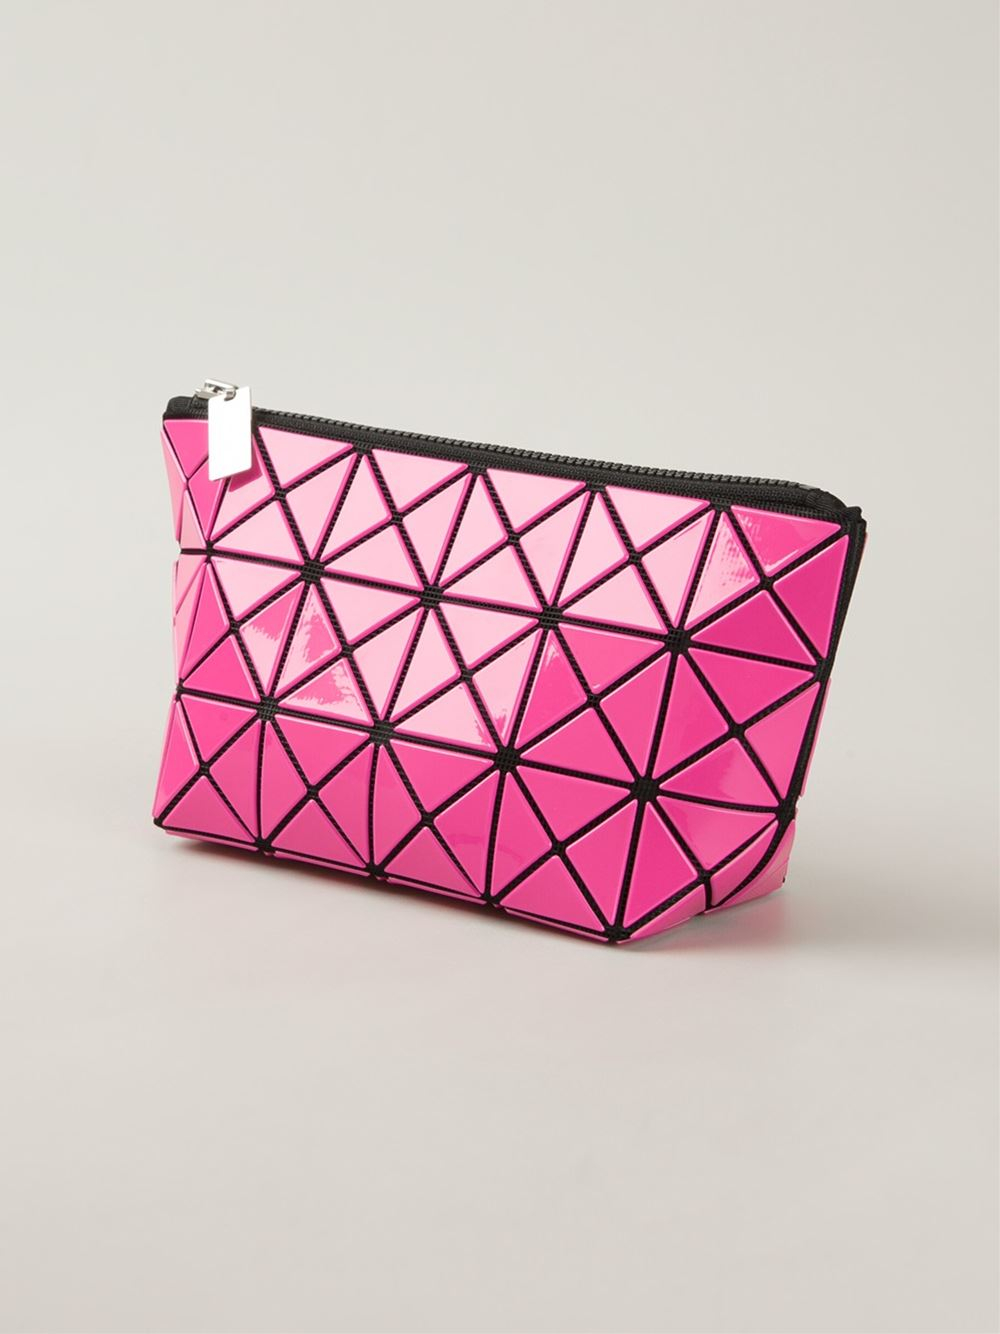 Bao Bao Issey Miyake 'Lucent-2' Clutch in Pink & Purple (Pink) - Lyst